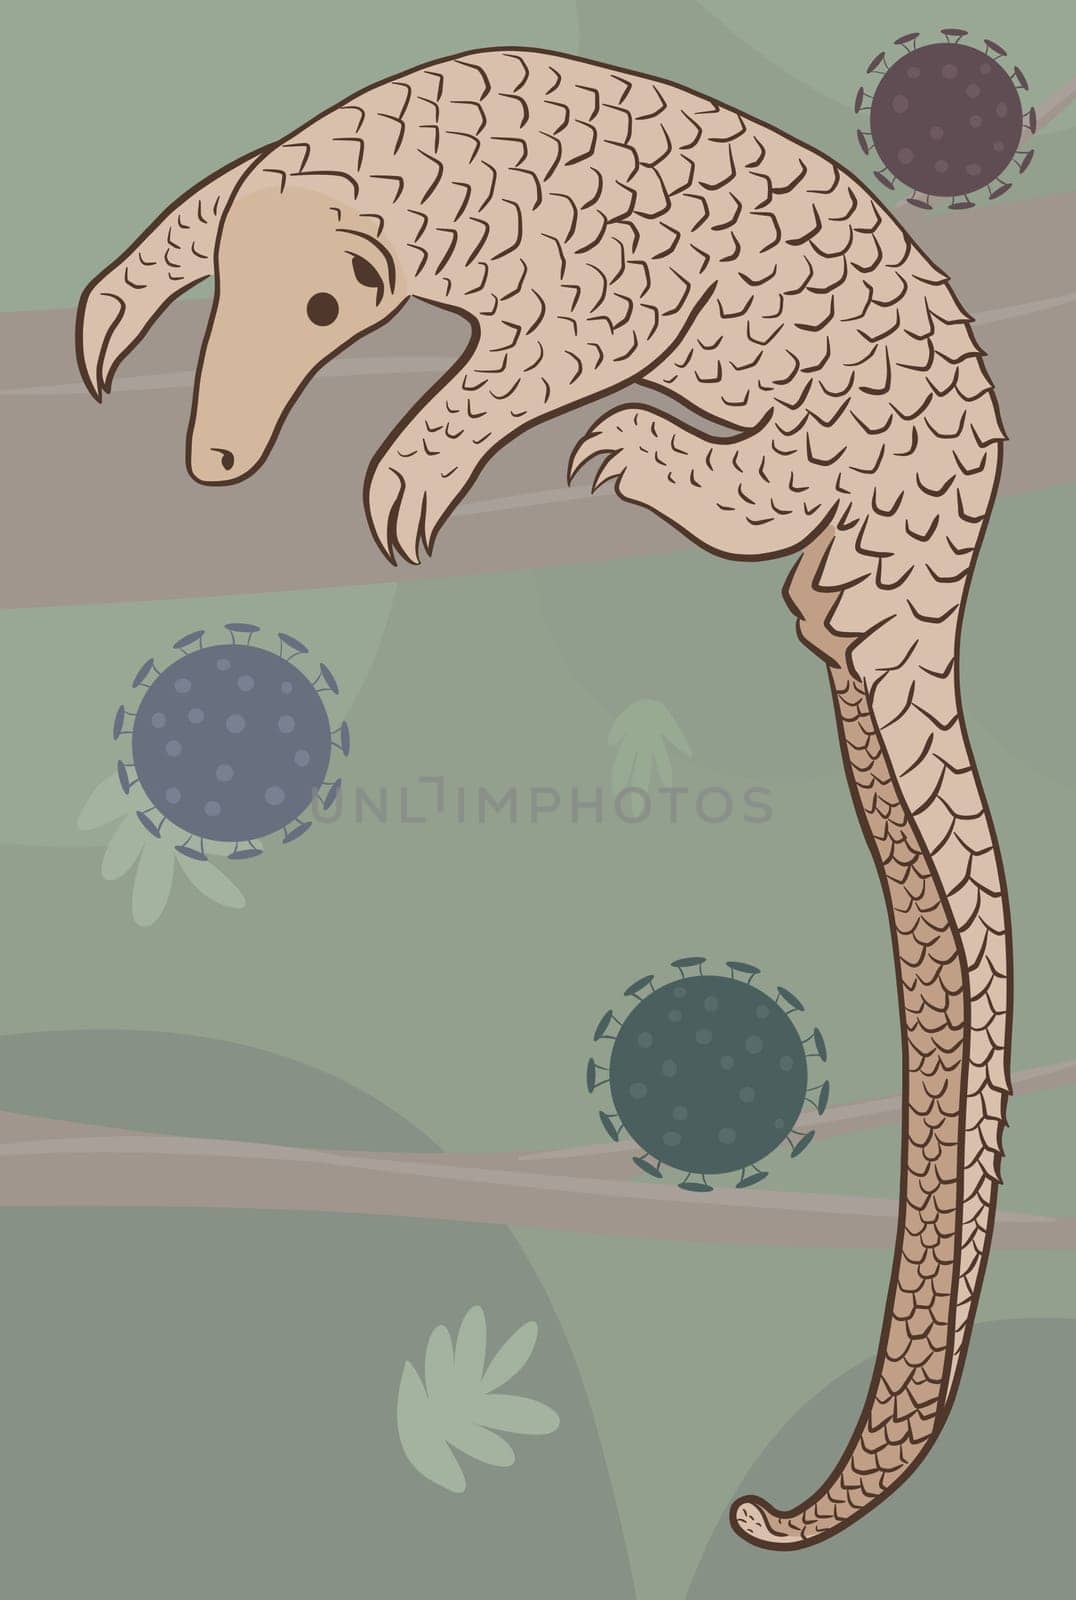 Pangolin or scaly anteater, a scales covered mammal from tropical areas such as Africa and Asia. by XabiDonostia